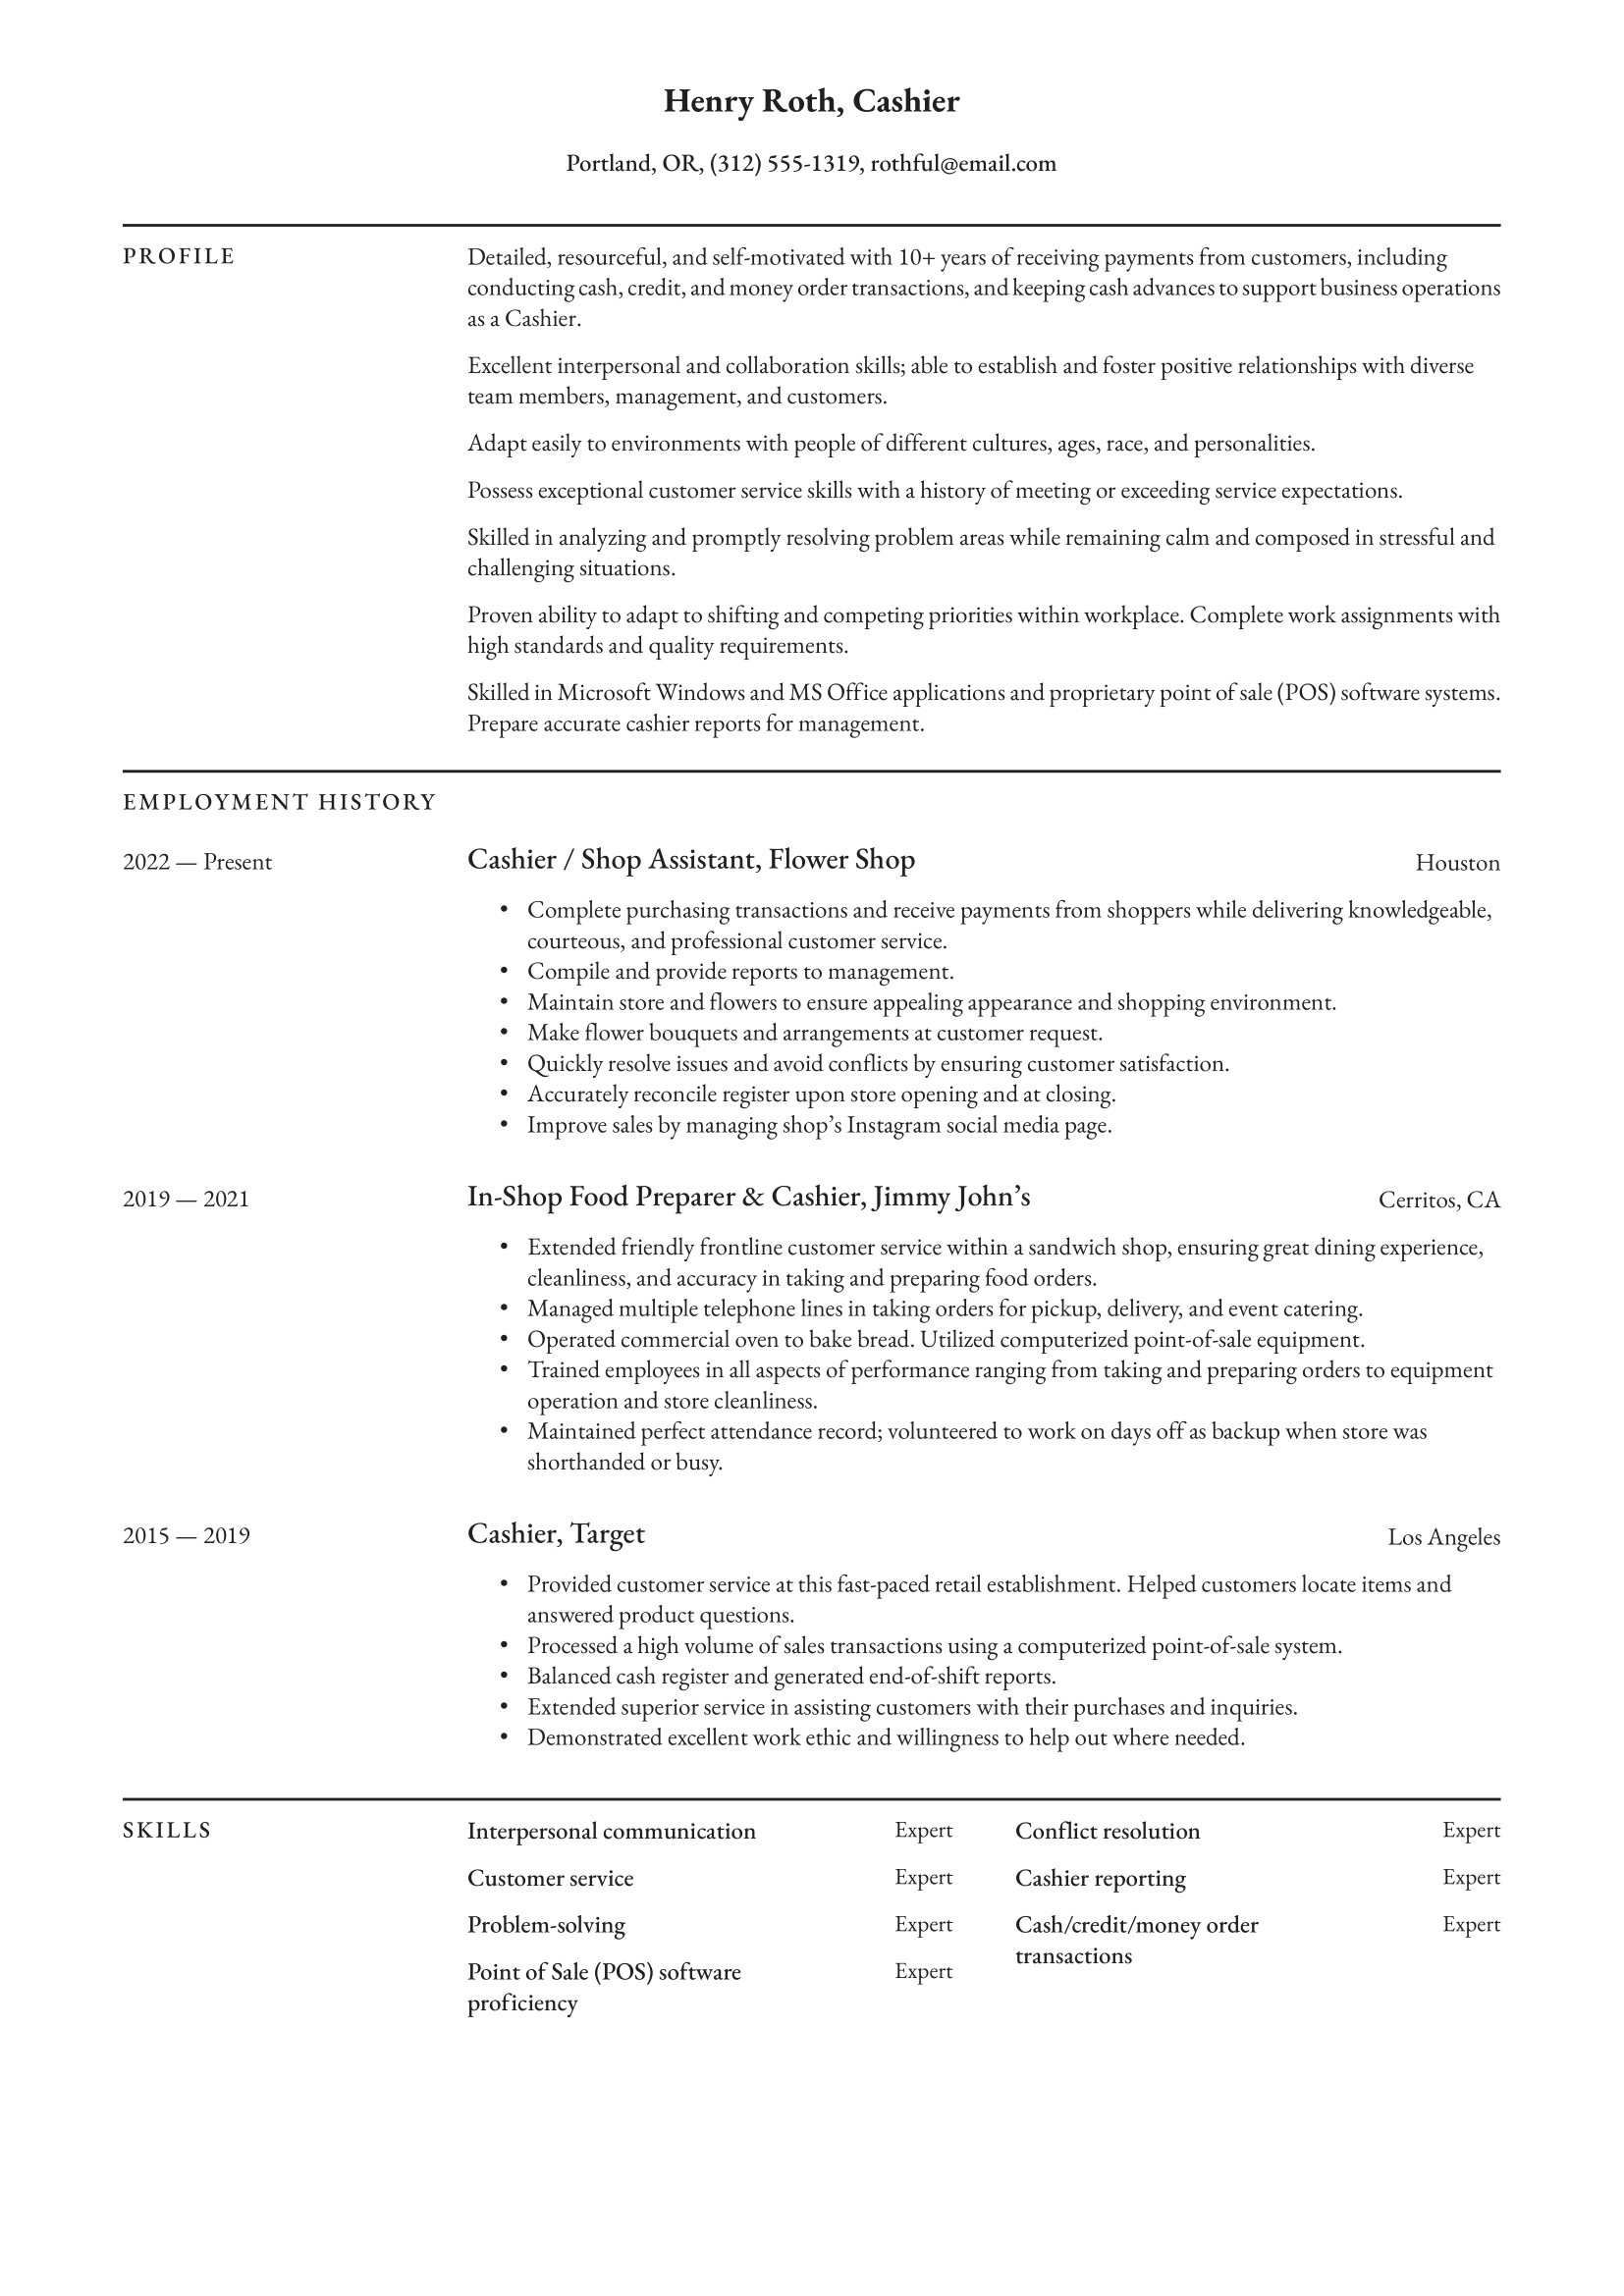 Cashier Resume Example & Writing Guide